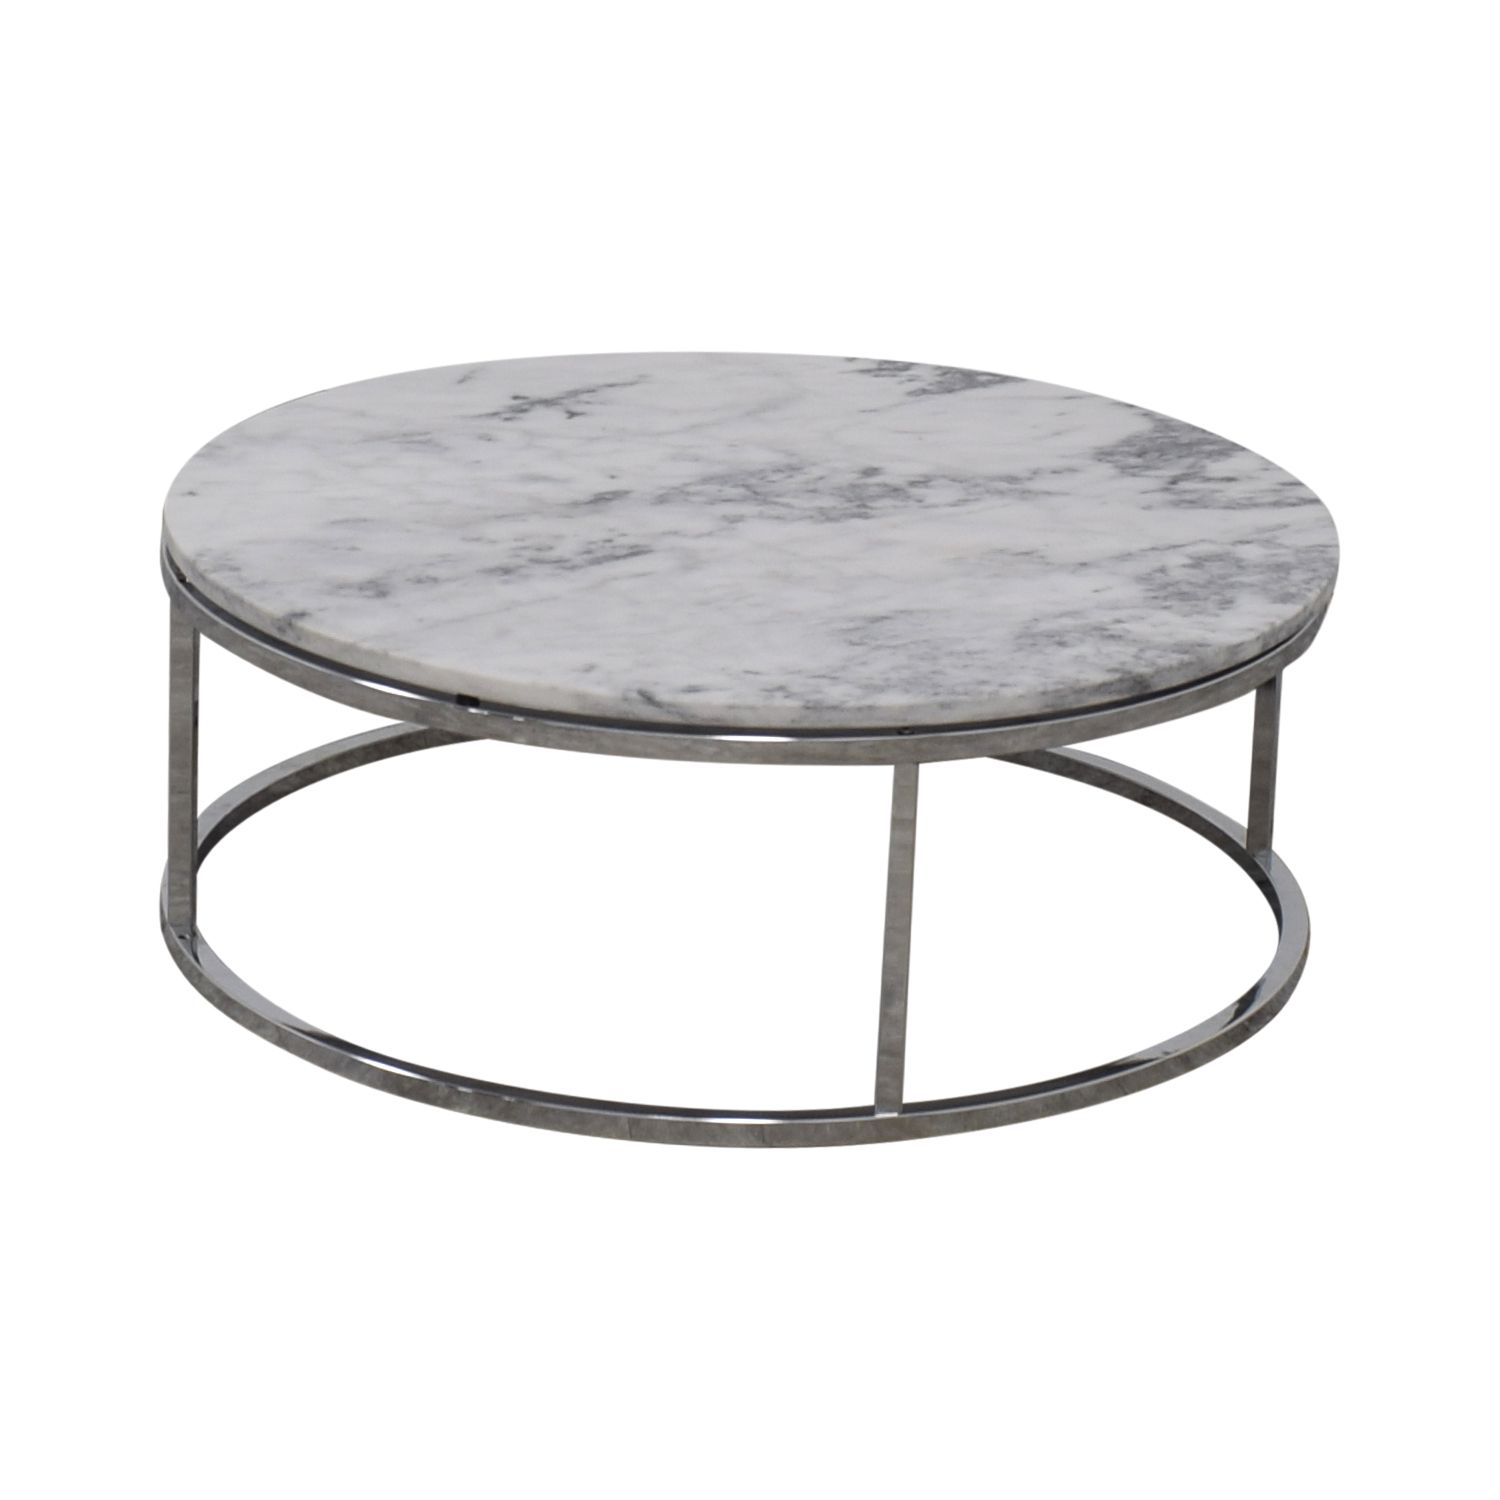 57% Off – Cb2 Cb2 Round White Marble Coffee Table / Tables Throughout Marble And White Coffee Tables (View 5 of 15)